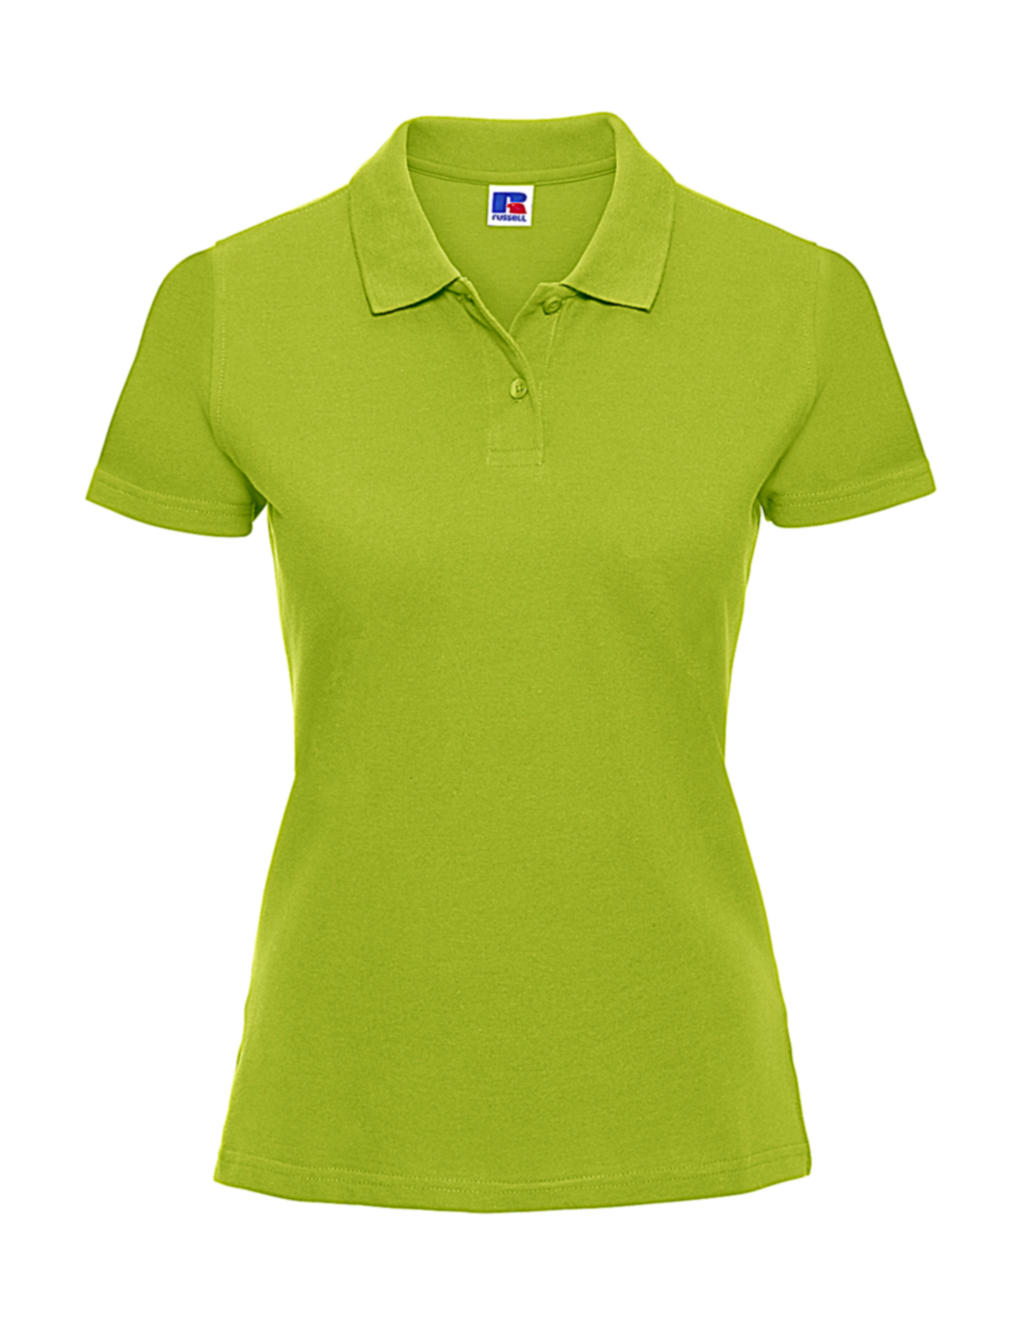  Ladies Classic Cotton Polo in Farbe Lime